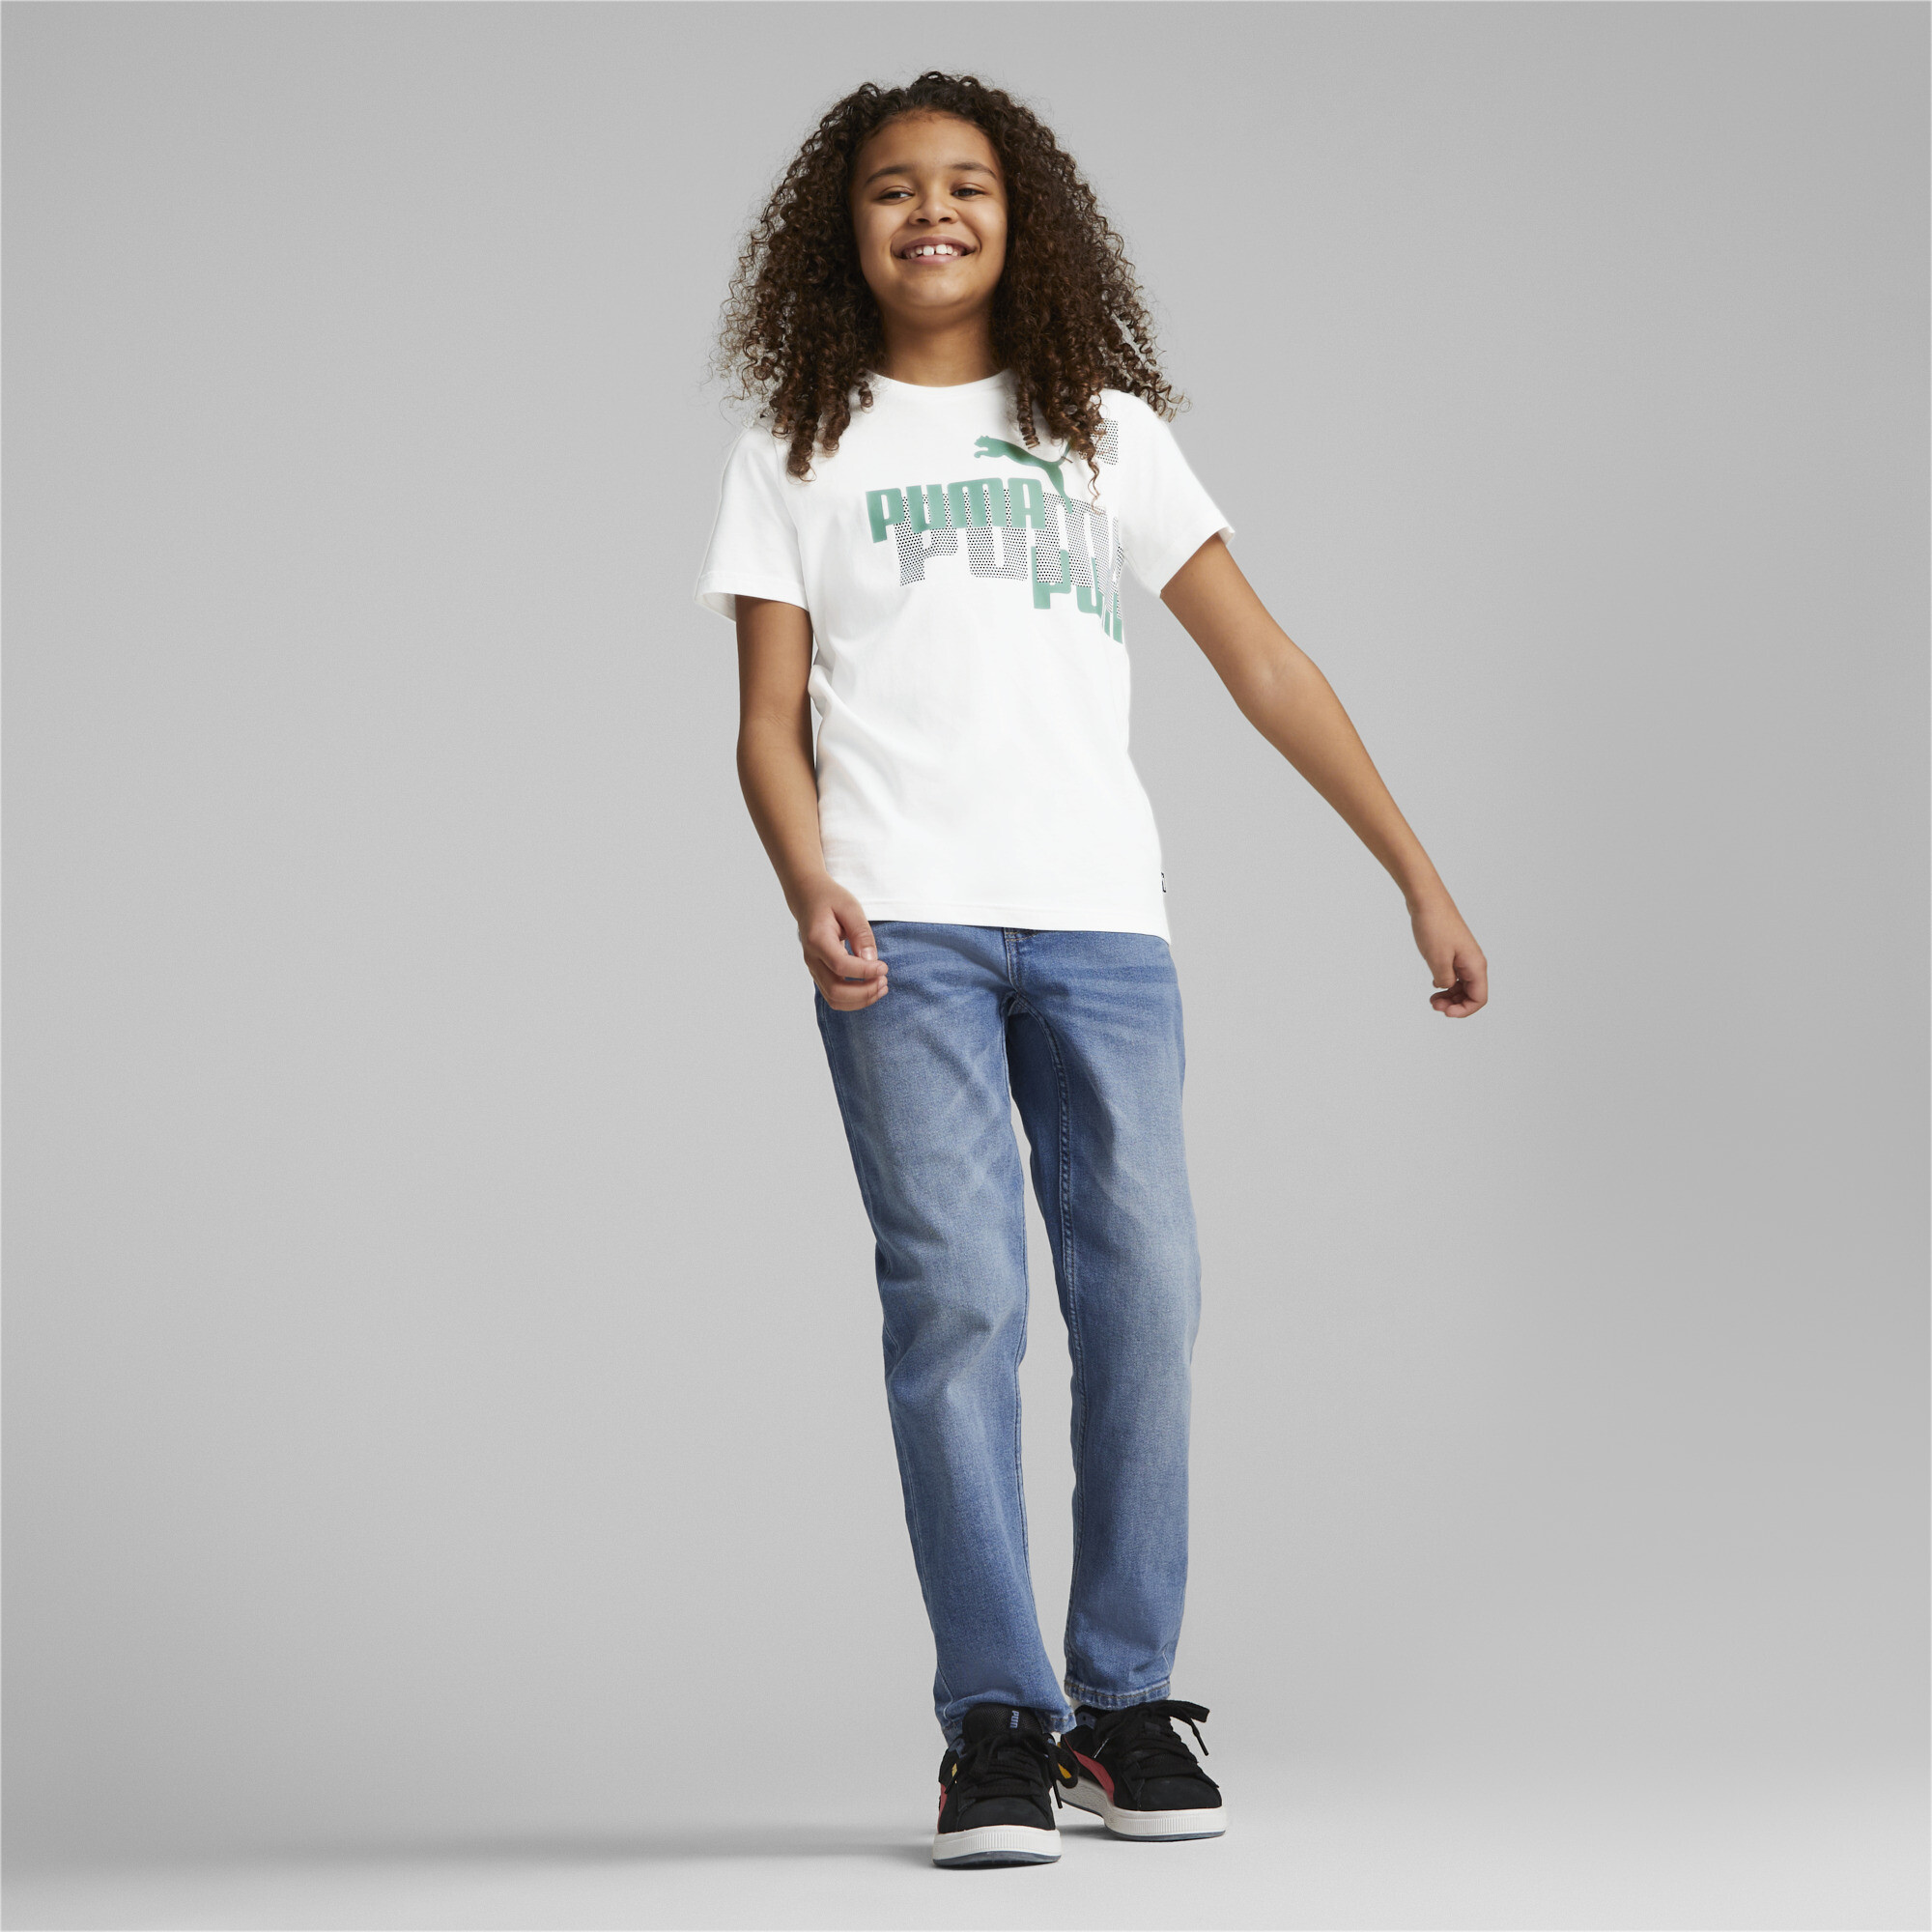 PUMA ESS+ LOGO POWER T-Shirt In White, Size 9-10 Youth